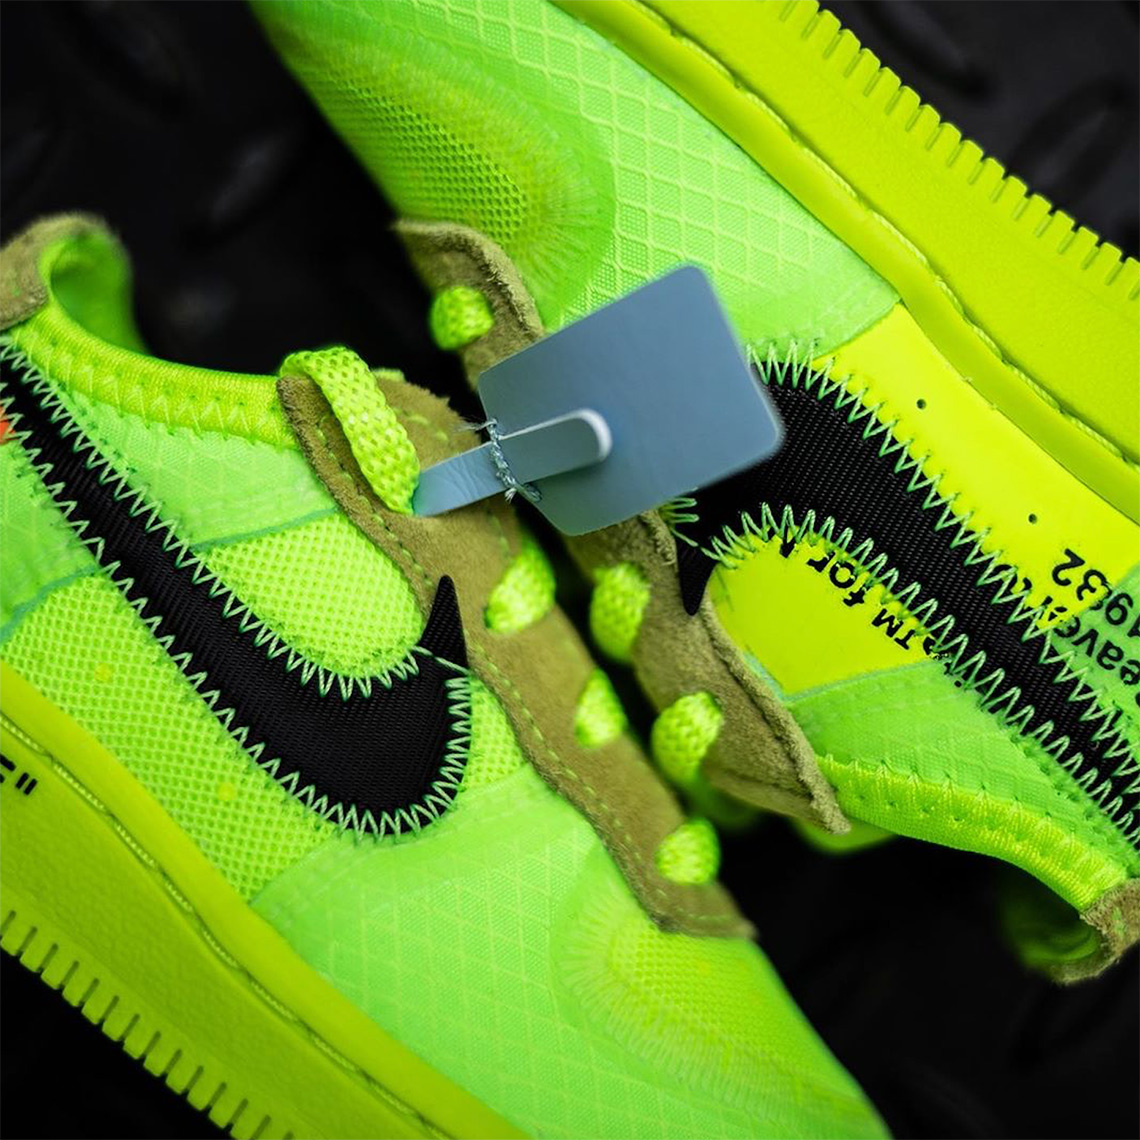 First Look At The OFF-WHITE x Nike Air Force 1 Low Volt Toddler